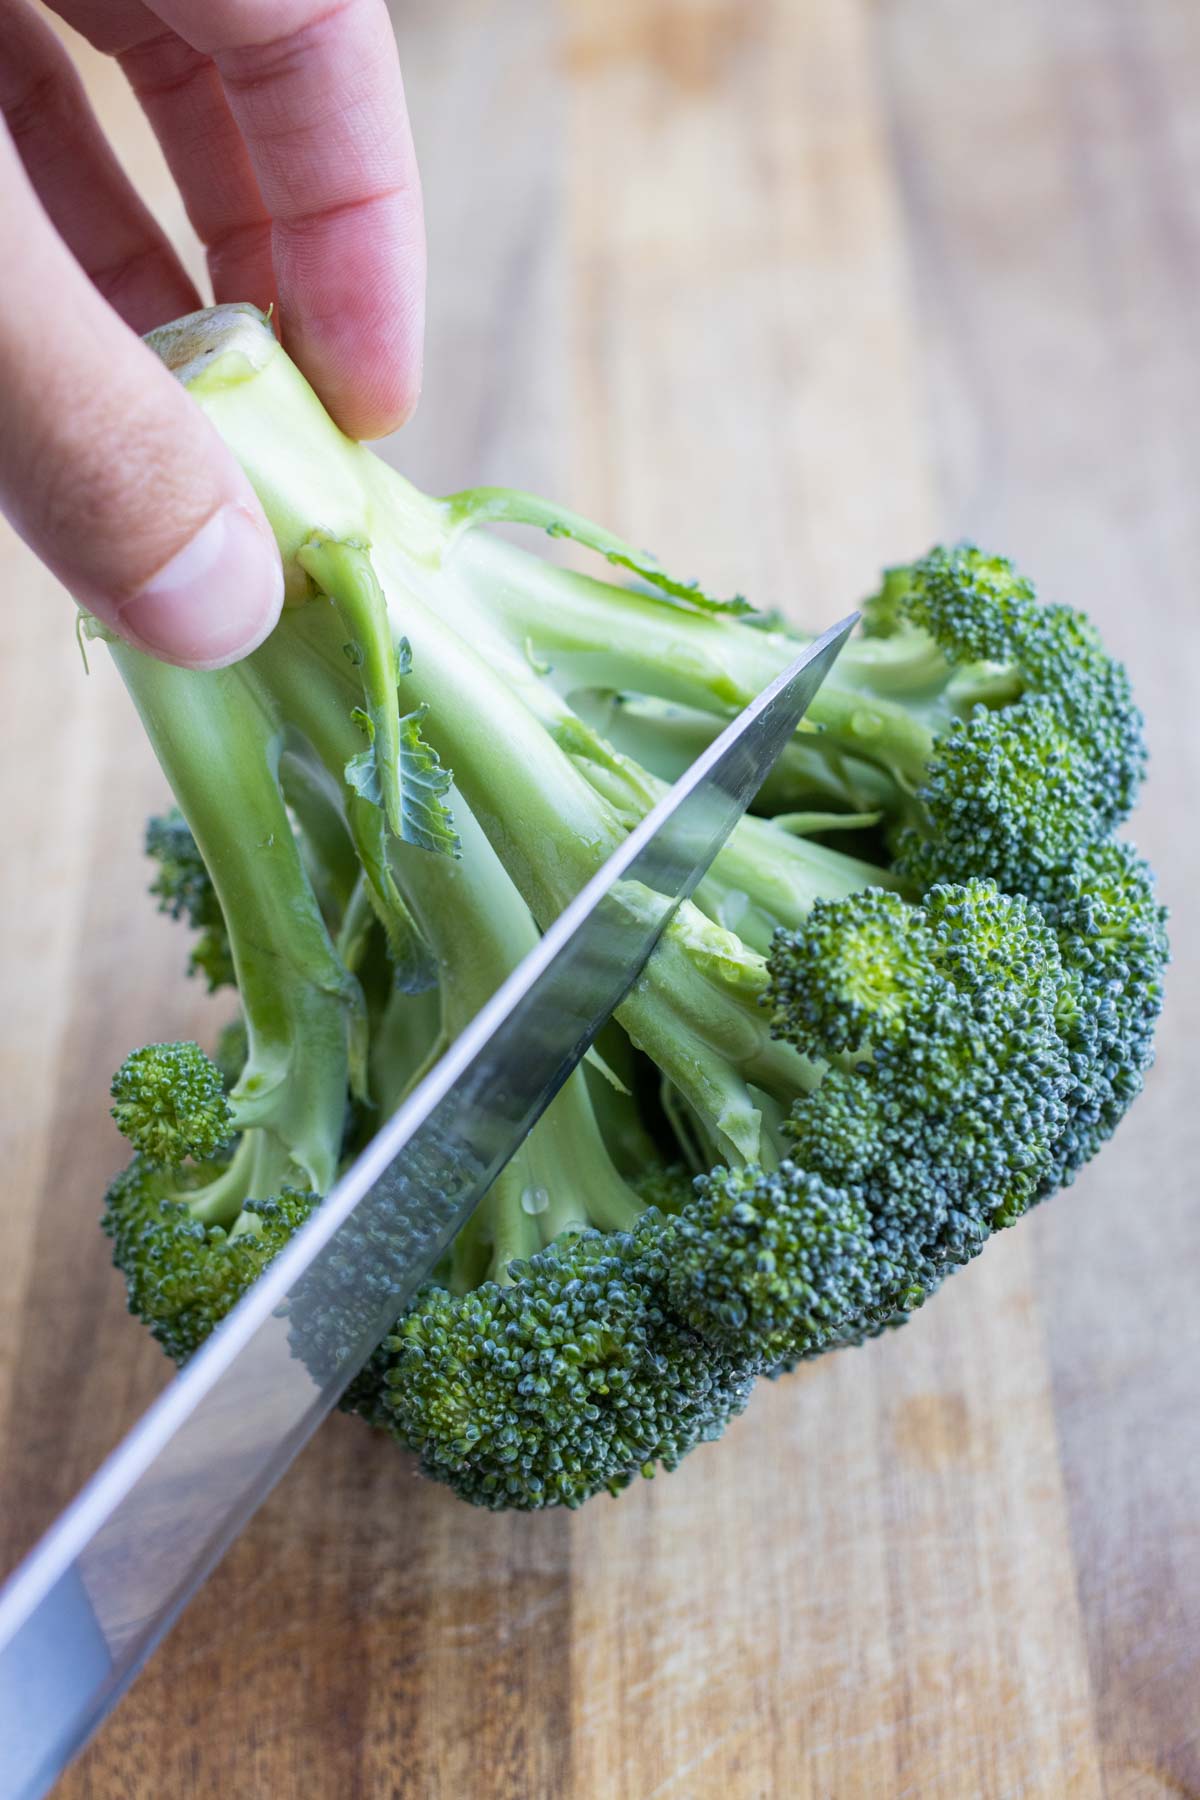 A knife removes the crown of the broccoli from the stem.